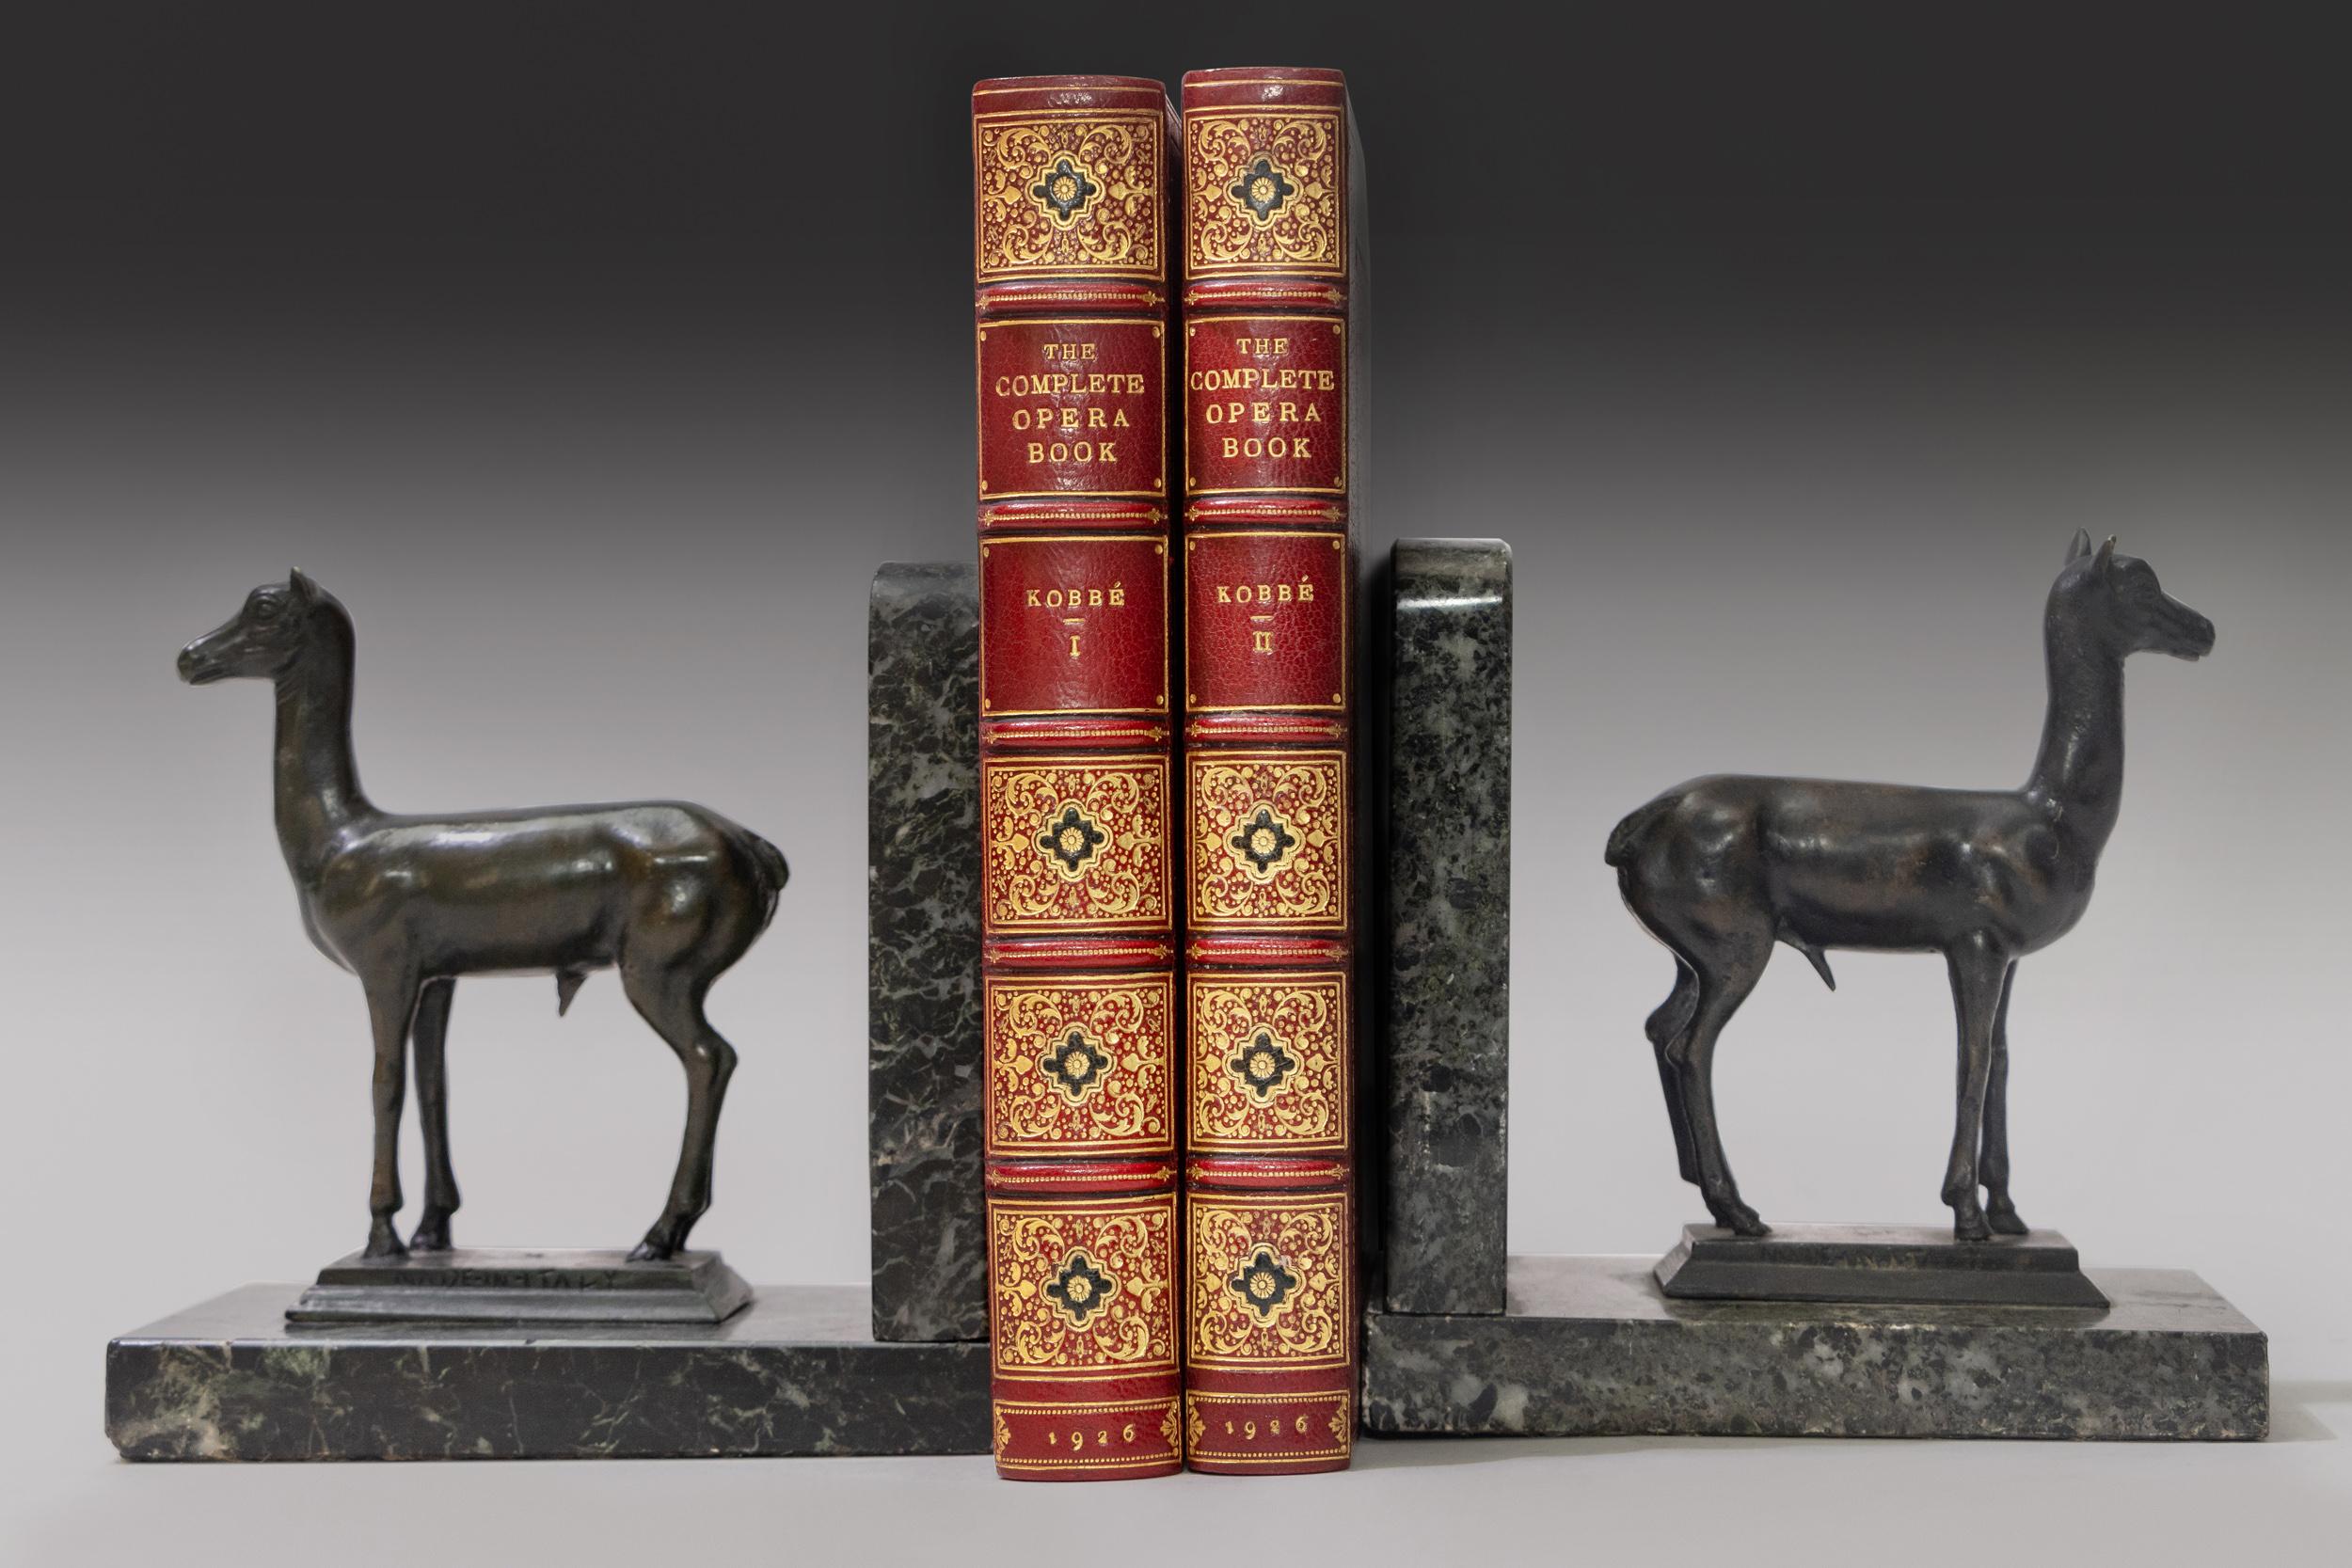 2 Volumes. Gustav Kobbe, The Complete Opera Book. Bound in red morocco. Gilt tooling on covers. Raised bands. Decorative gilt tooling on spine. All edges gilt. Marbled endpapers. Illustrated with 100 portraits in costume and scenes from opera.